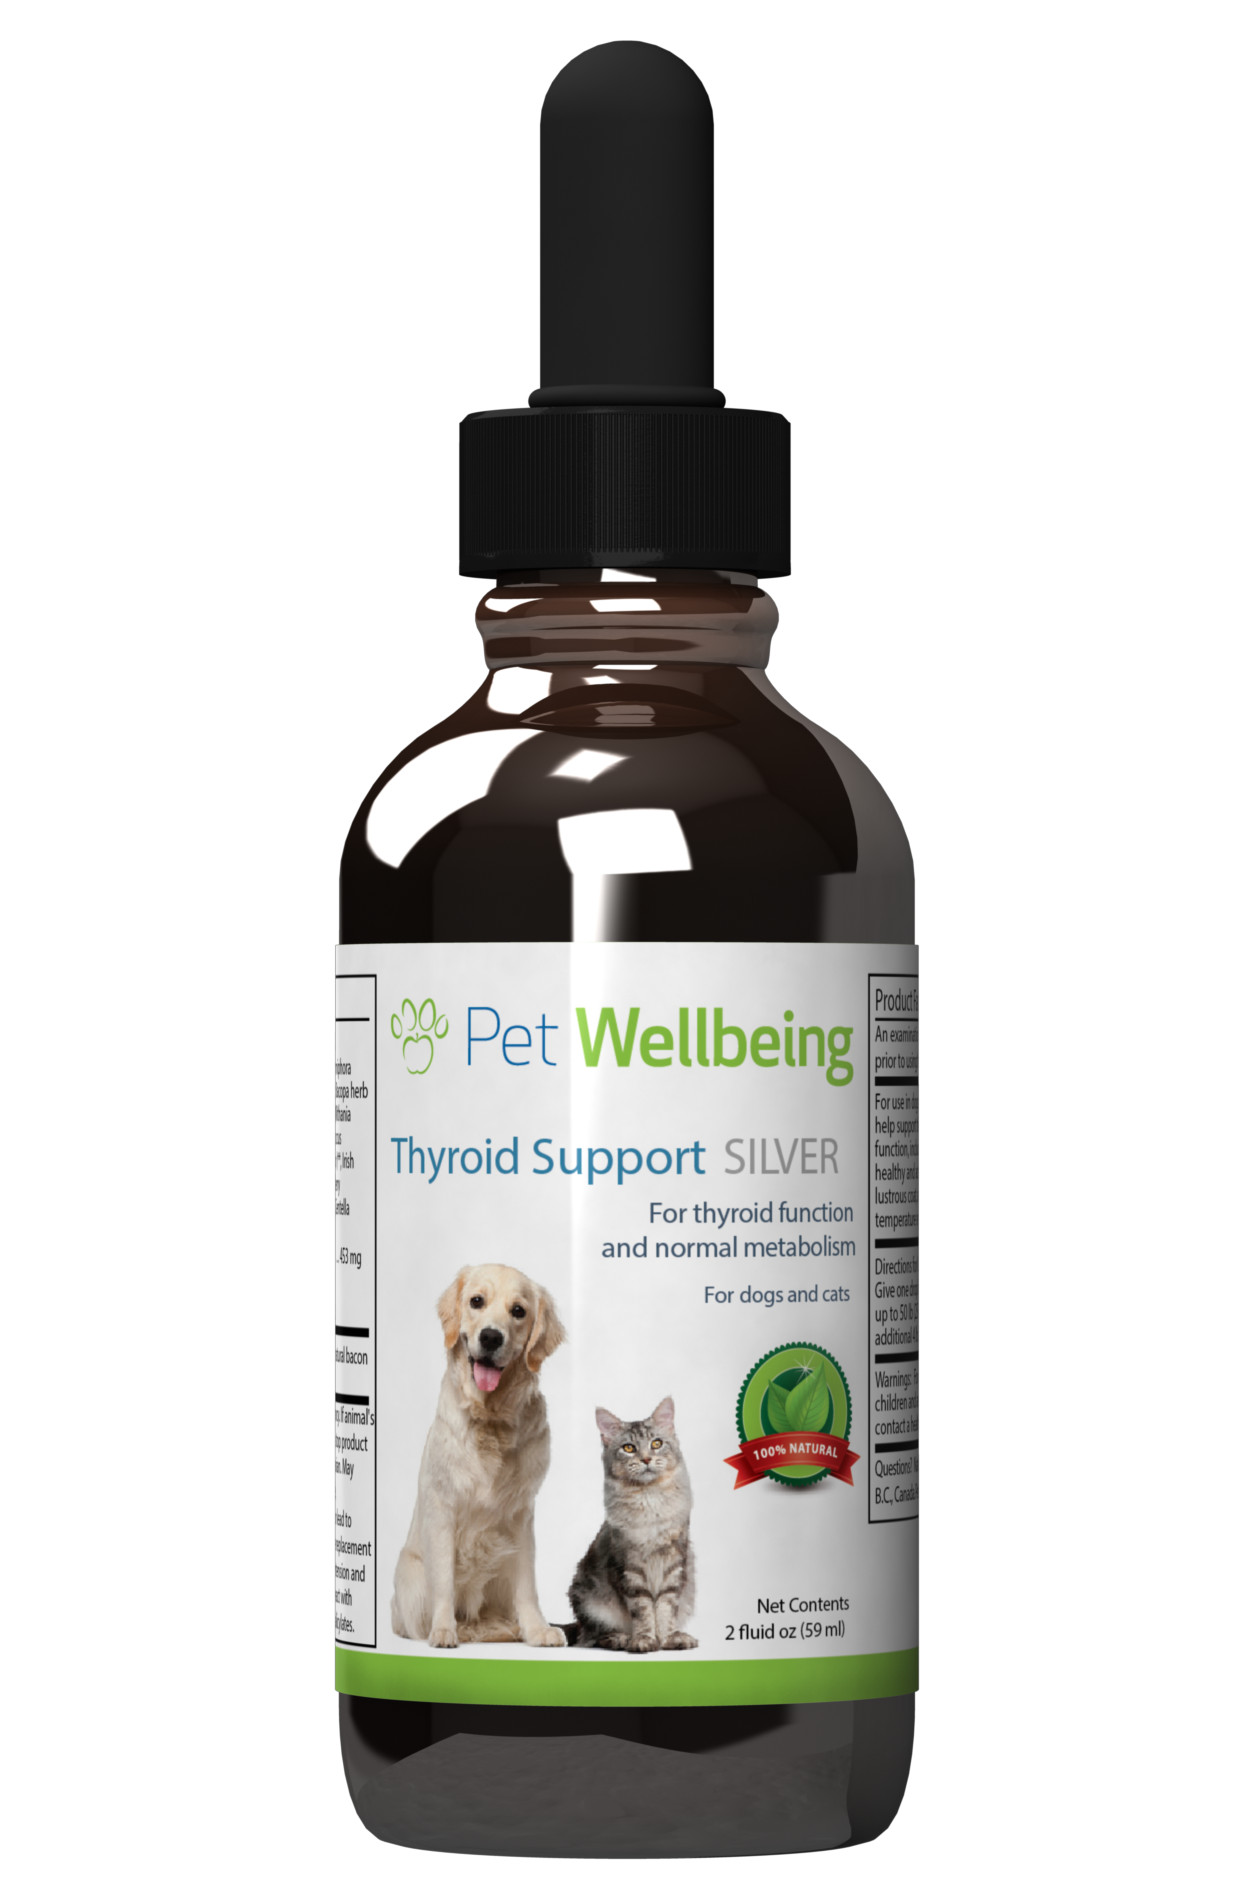 Thyroid Support Silver, 2oz, for Dogs & Cats